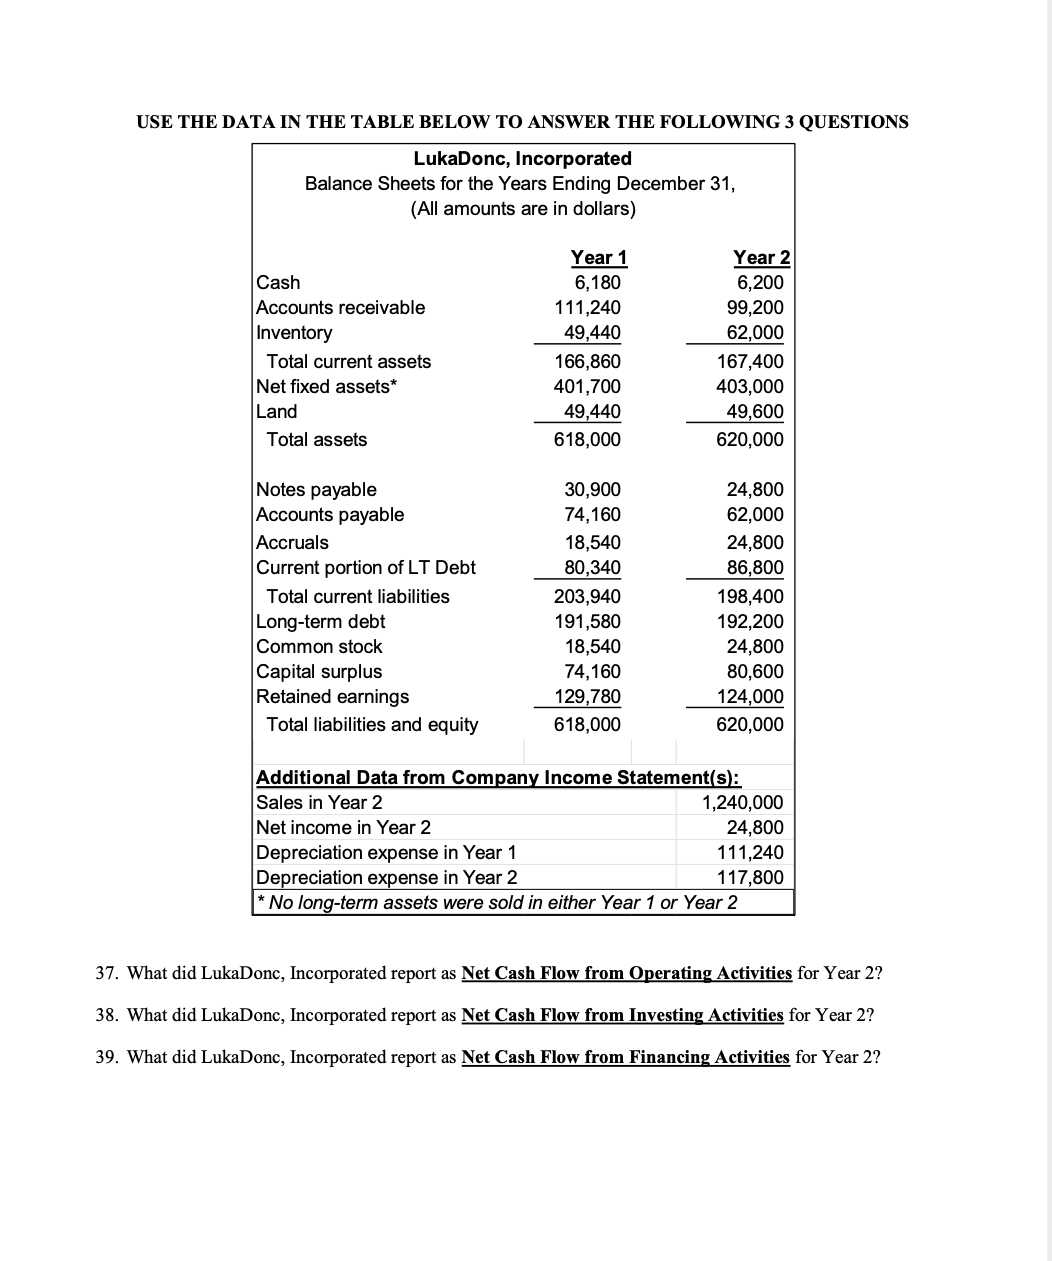 USE THE DATA IN THE TABLE BELOW TO ANSWER THE FOLLOWING 3 QUESTIONS
LukaDonc, Incorporated
Balance Sheets for the Years Ending December 31,
(All amounts are in dollars)
Year 1
Year 2
Cash
6,180
6,200
Accounts receivable
111,240
99,200
Inventory
49,440
62,000
Total current assets
166,860
167,400
Net fixed assets*
401,700
403,000
Land
49,440
49,600
Total assets
618,000
620,000
Notes payable
30,900
24,800
Accounts payable
74,160
62,000
Accruals
18,540
24,800
Current portion of LT Debt
80,340
86,800
Total current liabilities
203,940
198,400
Long-term debt
191,580
192,200
Common stock
18,540
24,800
Capital surplus
74,160
80,600
Retained earnings
129,780
124,000
Total liabilities and equity
618,000
620,000
Additional Data from Company Income Statement(s):
Sales in Year 2
1,240,000
Net income in Year 2
24,800
Depreciation expense in Year 1
111,240
Depreciation expense in Year 2
117,800
*No long-term assets were sold in either Year 1 or Year 2
37. What did LukaDonc, Incorporated report as Net Cash Flow from Operating Activities for Year 2?
38. What did LukaDonc, Incorporated report as Net Cash Flow from Investing Activities for Year 2?
39. What did LukaDonc, Incorporated report as Net Cash Flow from Financing Activities for Year 2?